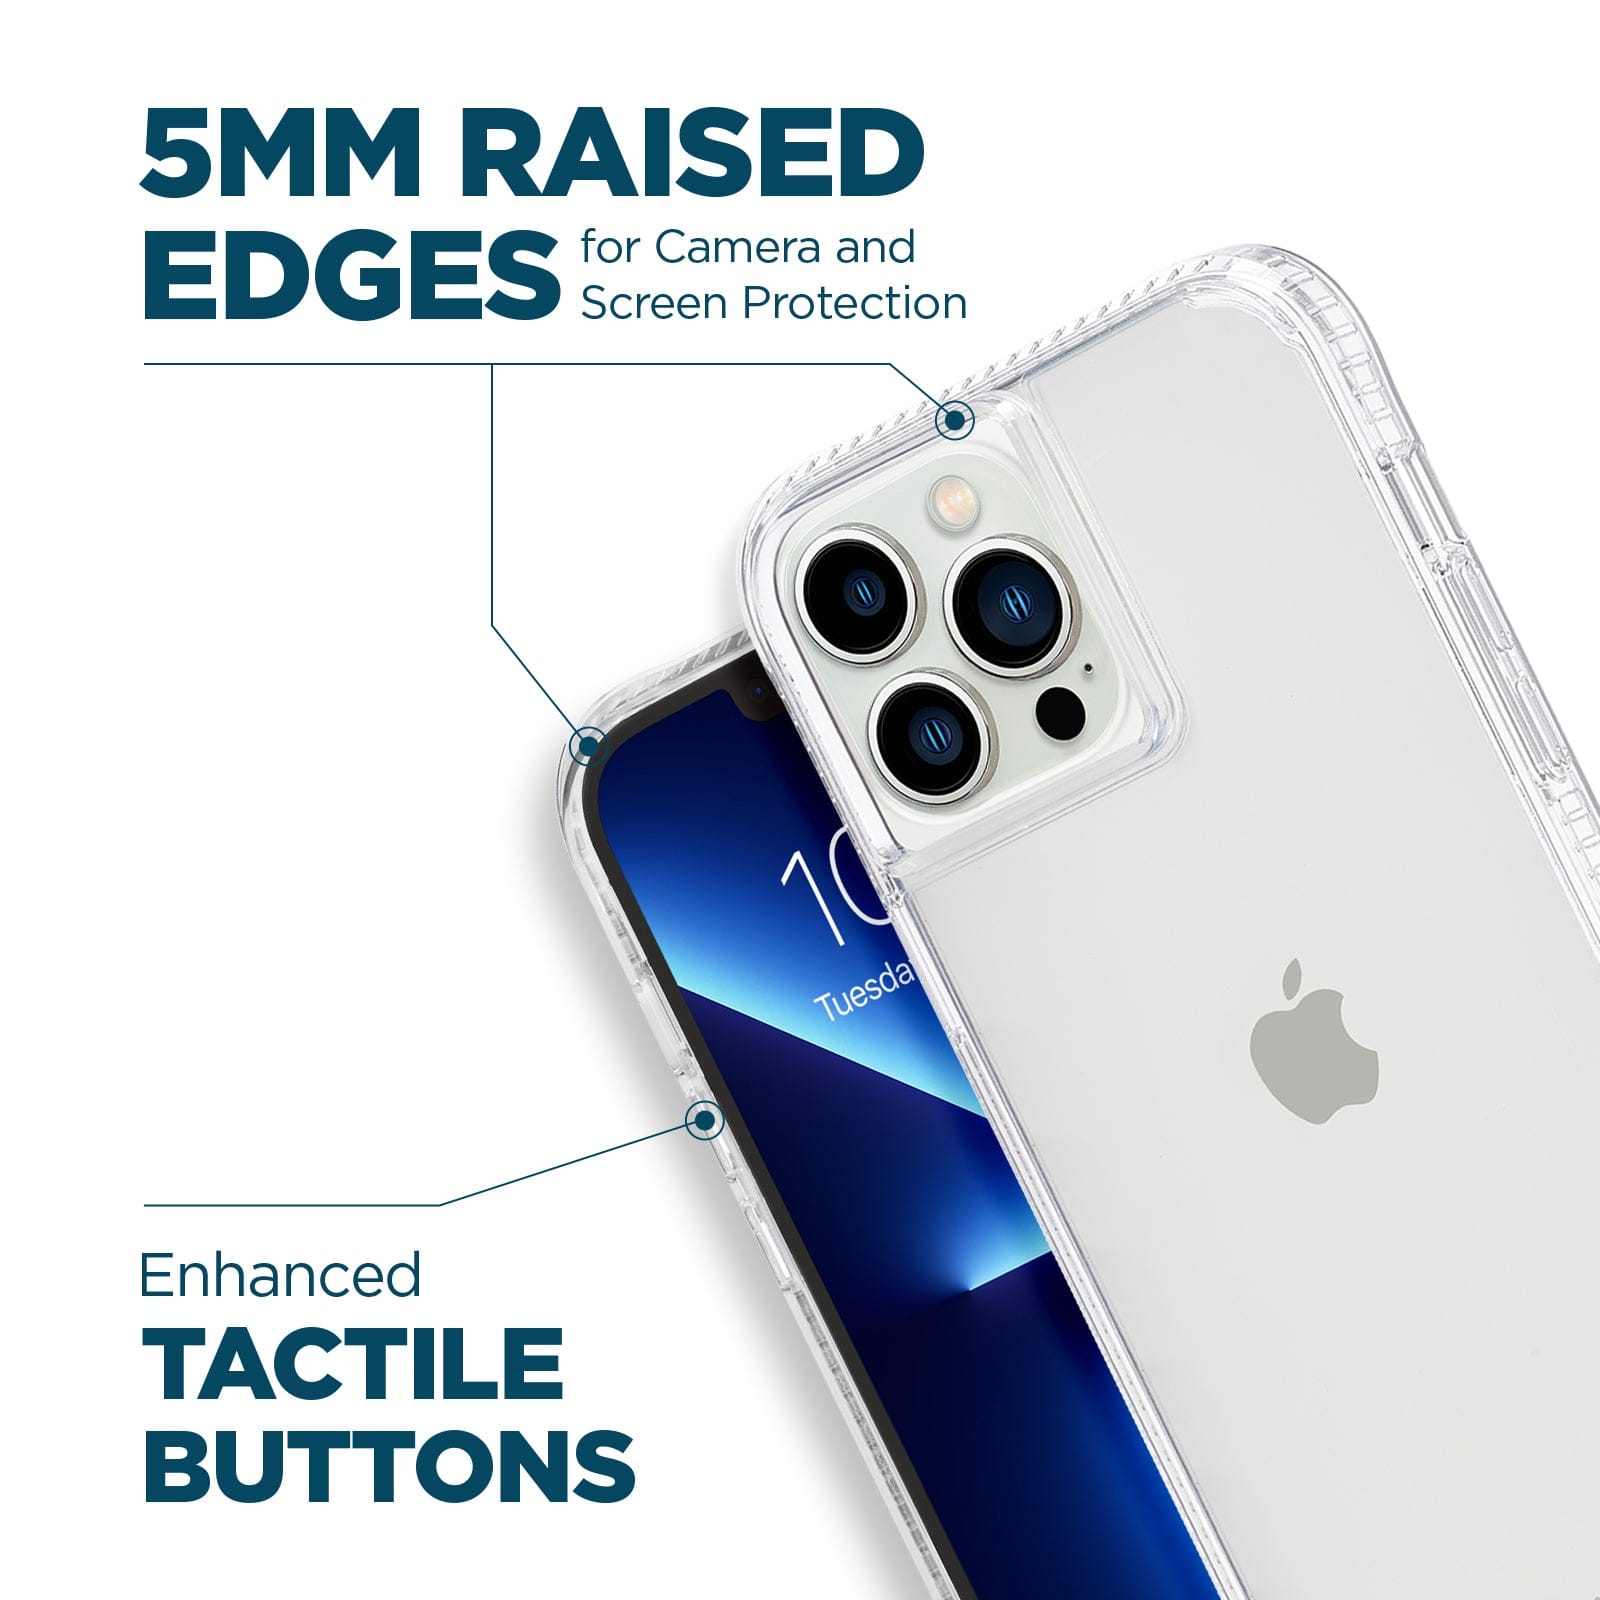 5mm raised edges for camera and screen protection. Enhanced tactile buttons. color::Clear